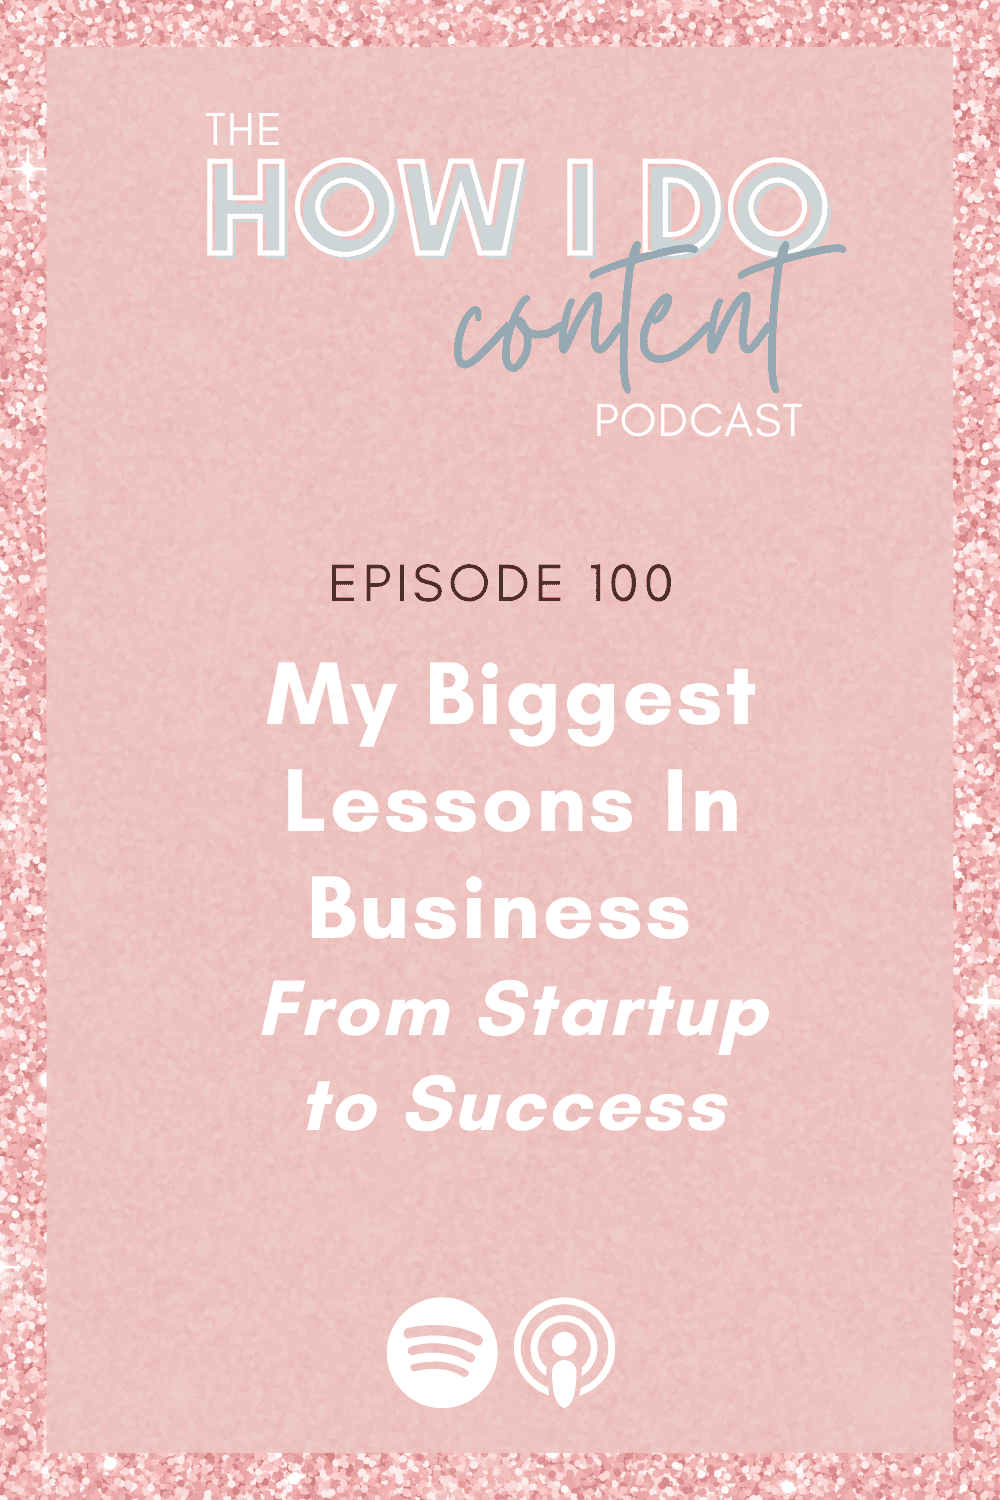 My Biggest Lessons In Business - From Startup to Success